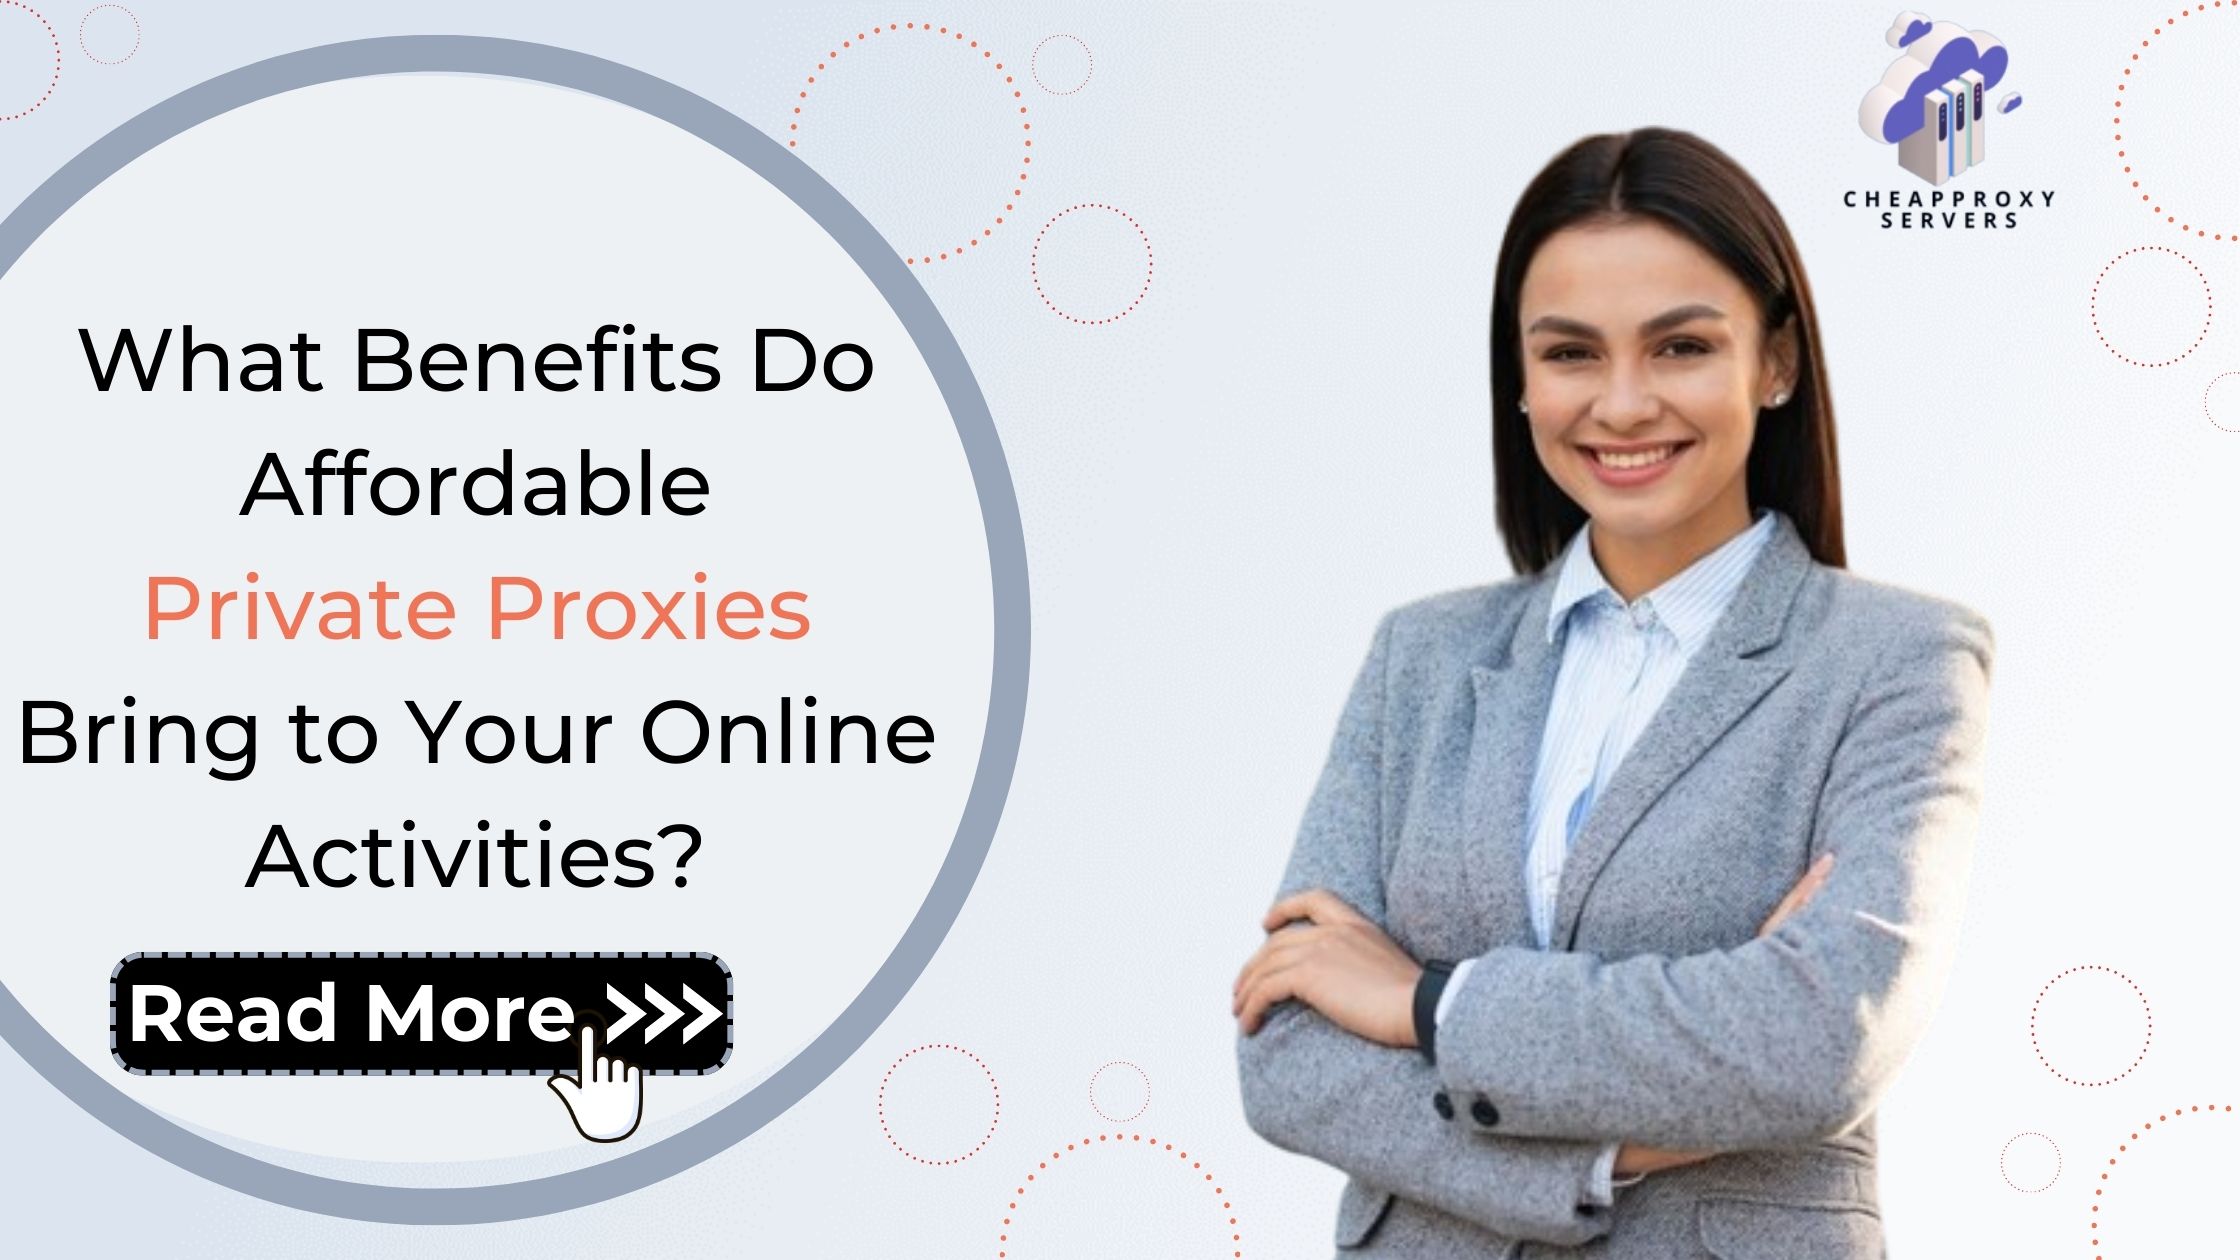 Benefits Do Affordable Private Proxies Bring to Your Online Activities?